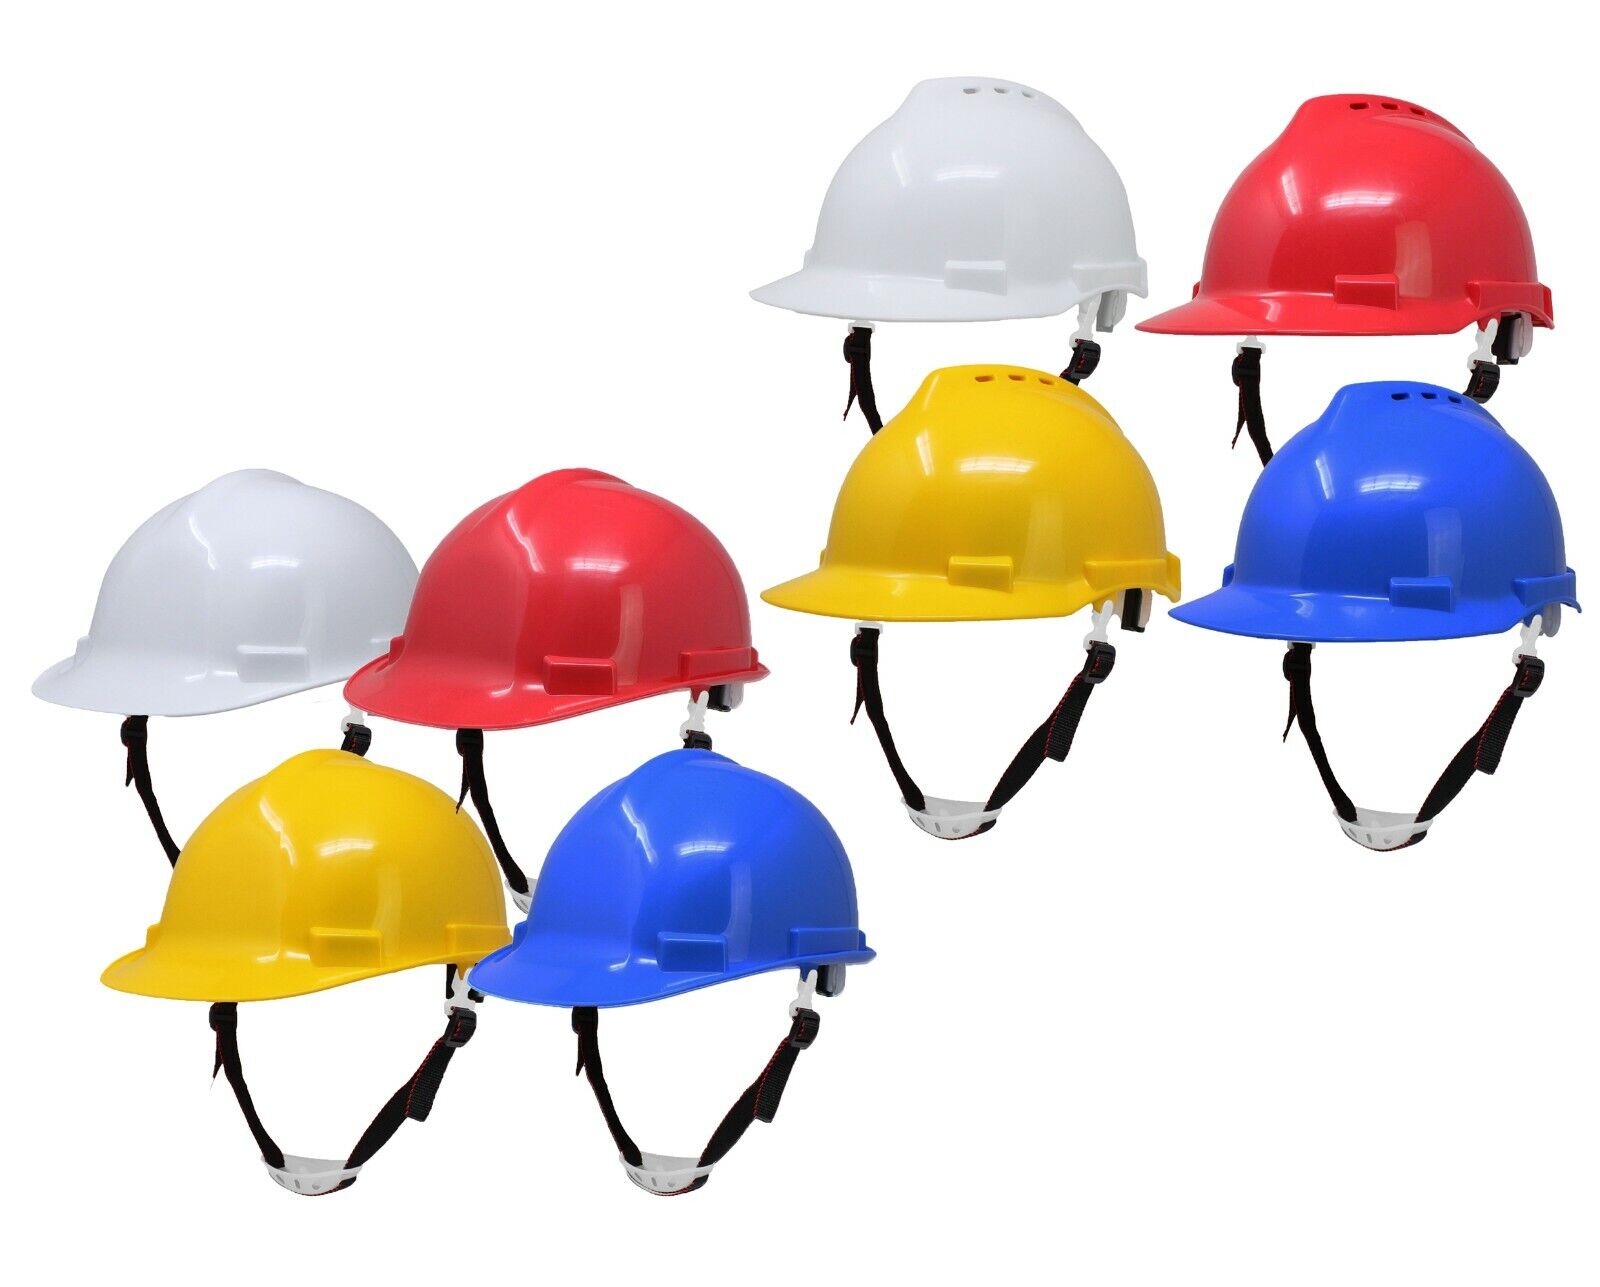 Various types of head protection equipment